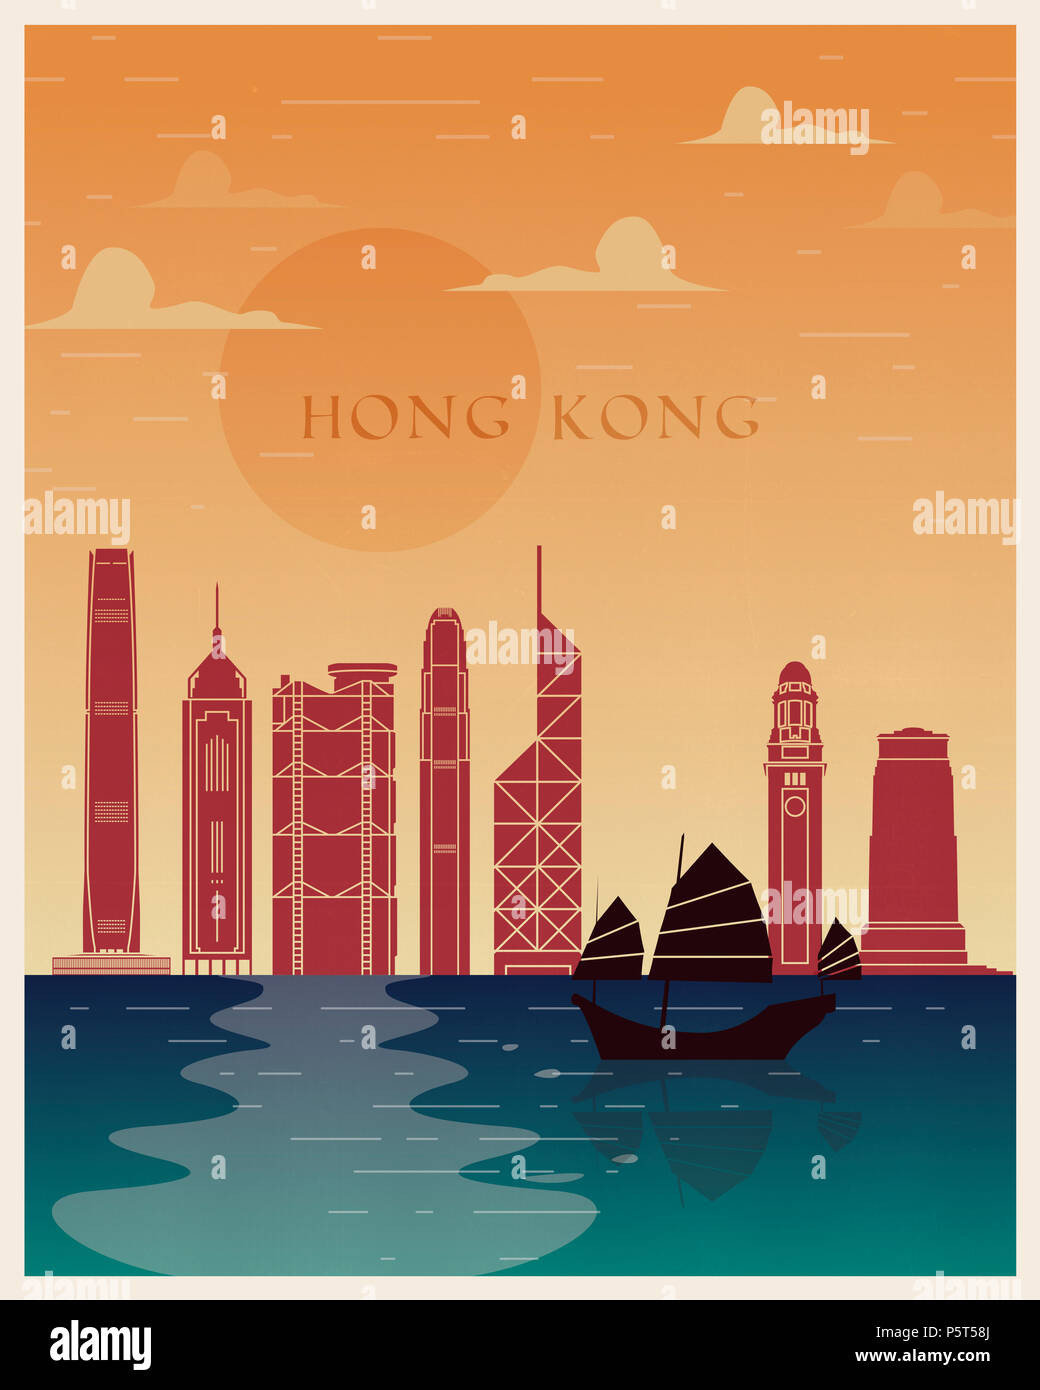 images Alamy and poster photography hi-res Hong kong - stock